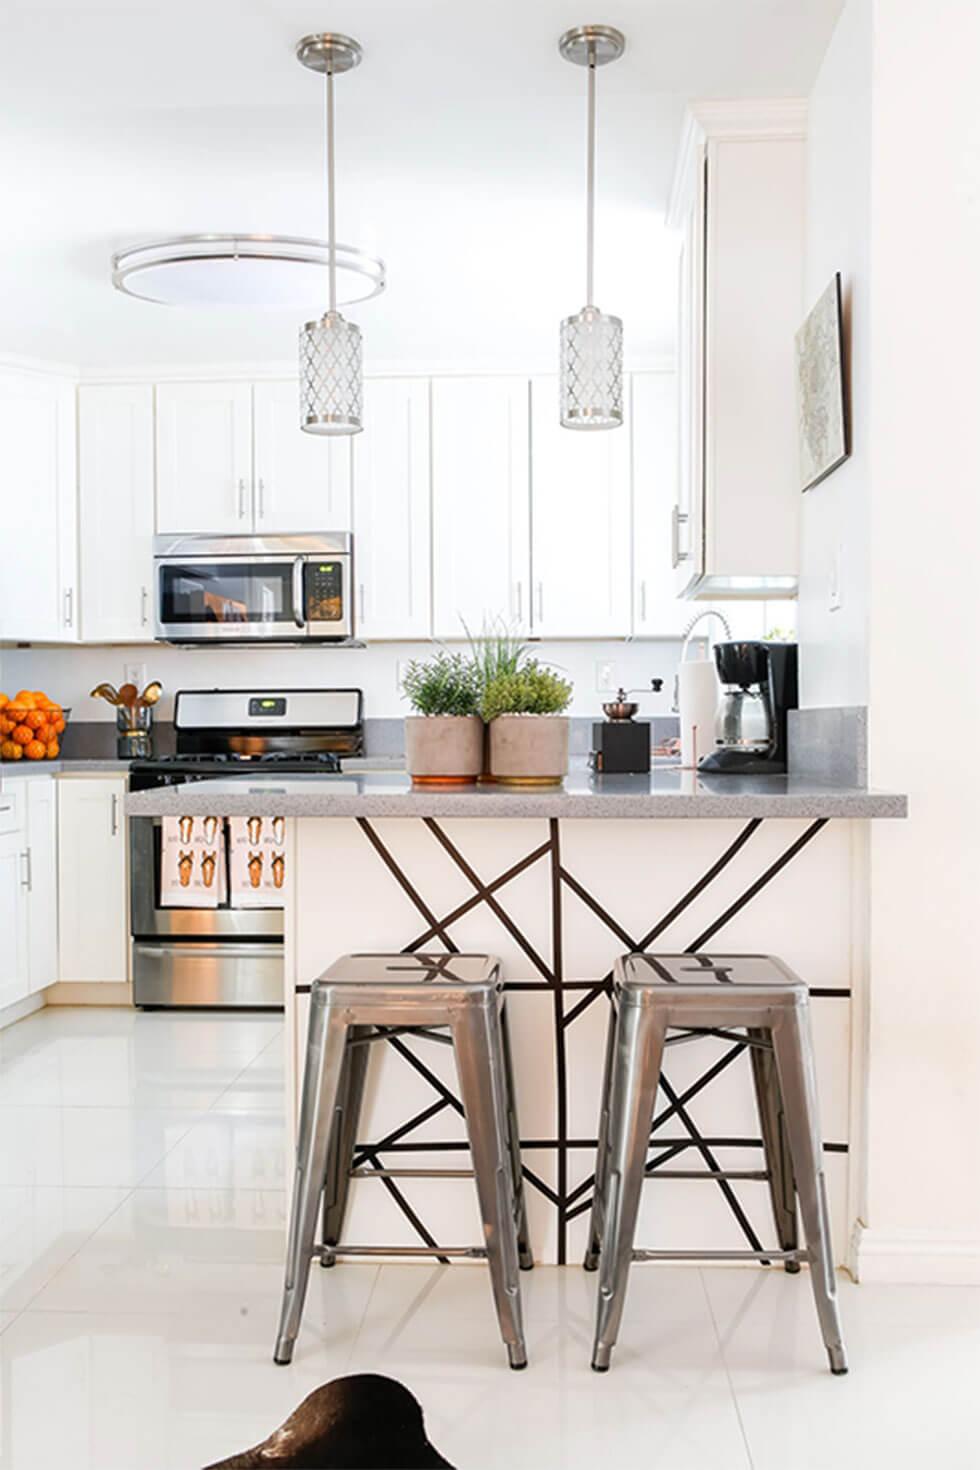 Simple small white kitchen with silver bar stools at a kitchen island with low lamps